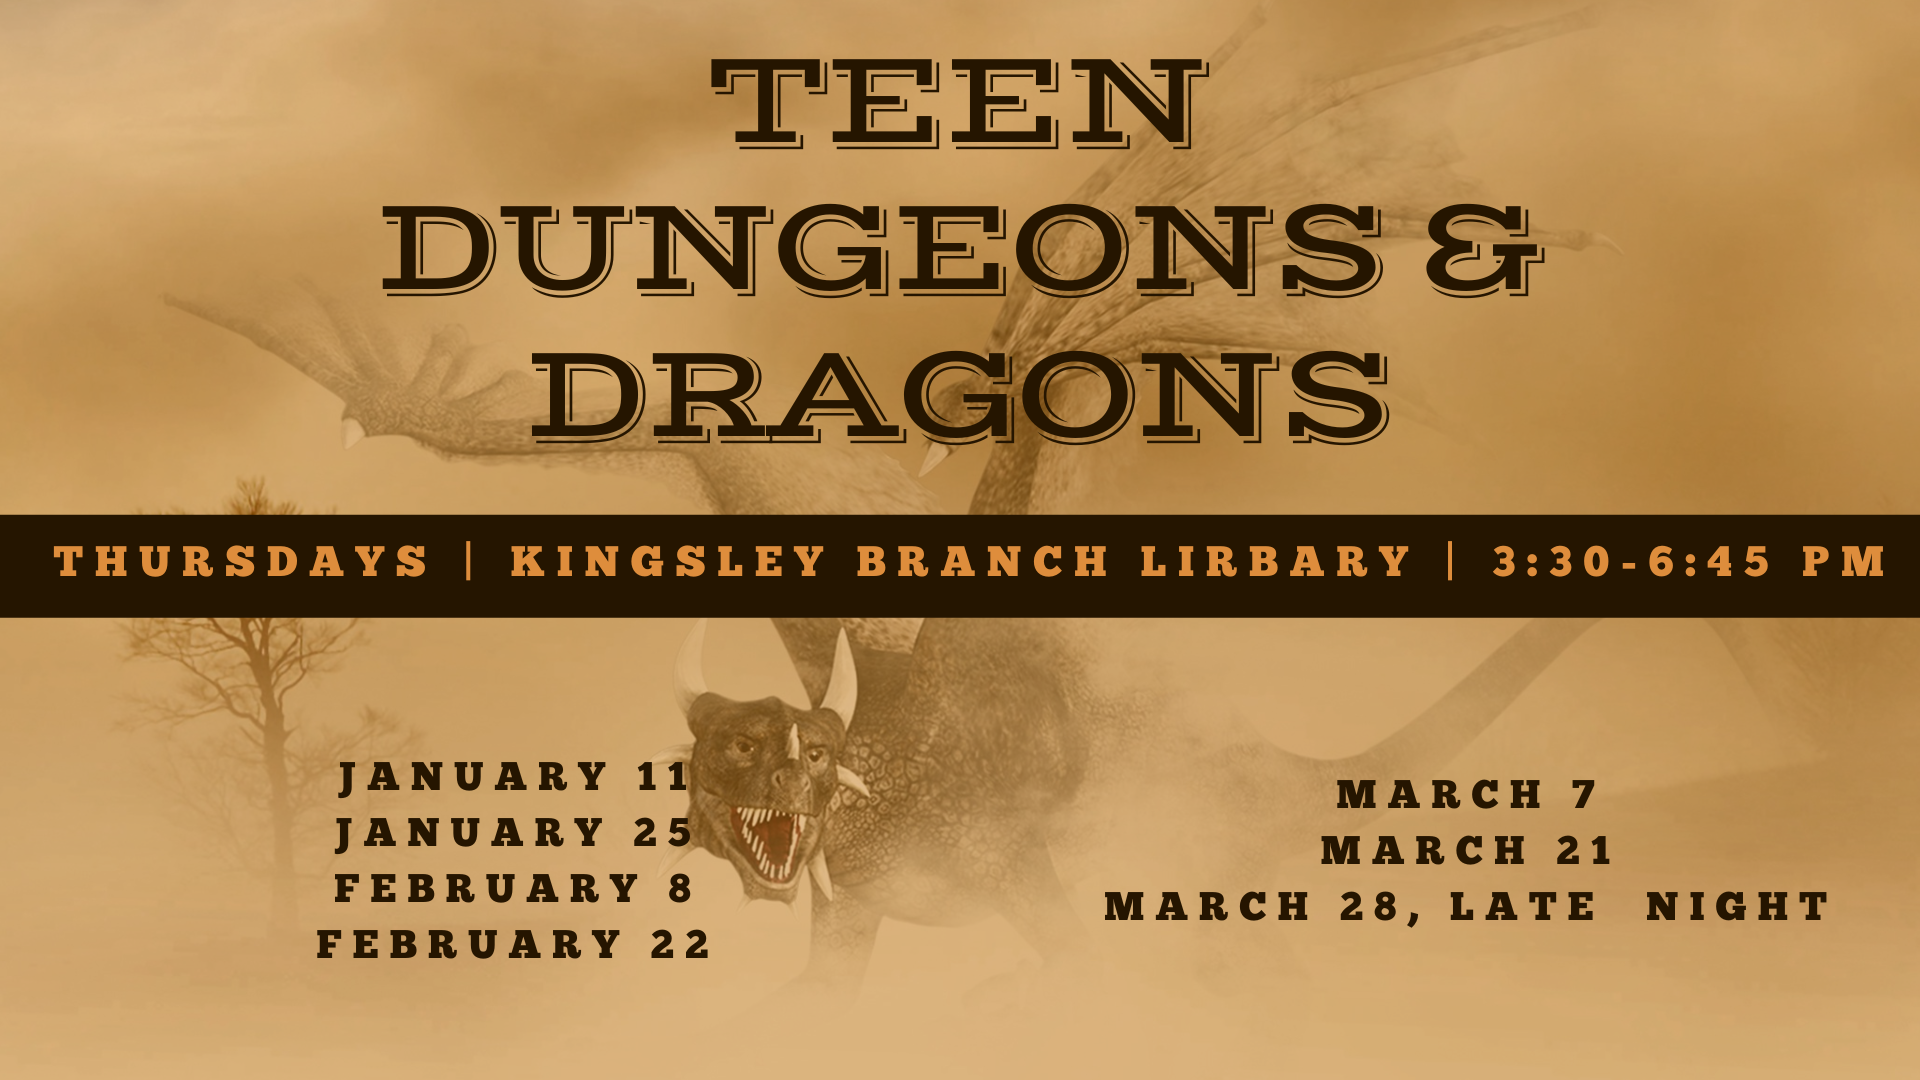 Image of a dragon roaring. Overlay text says Teen Dungeons and dragons on select Thursdays from 3:30 to 6:45 pm.